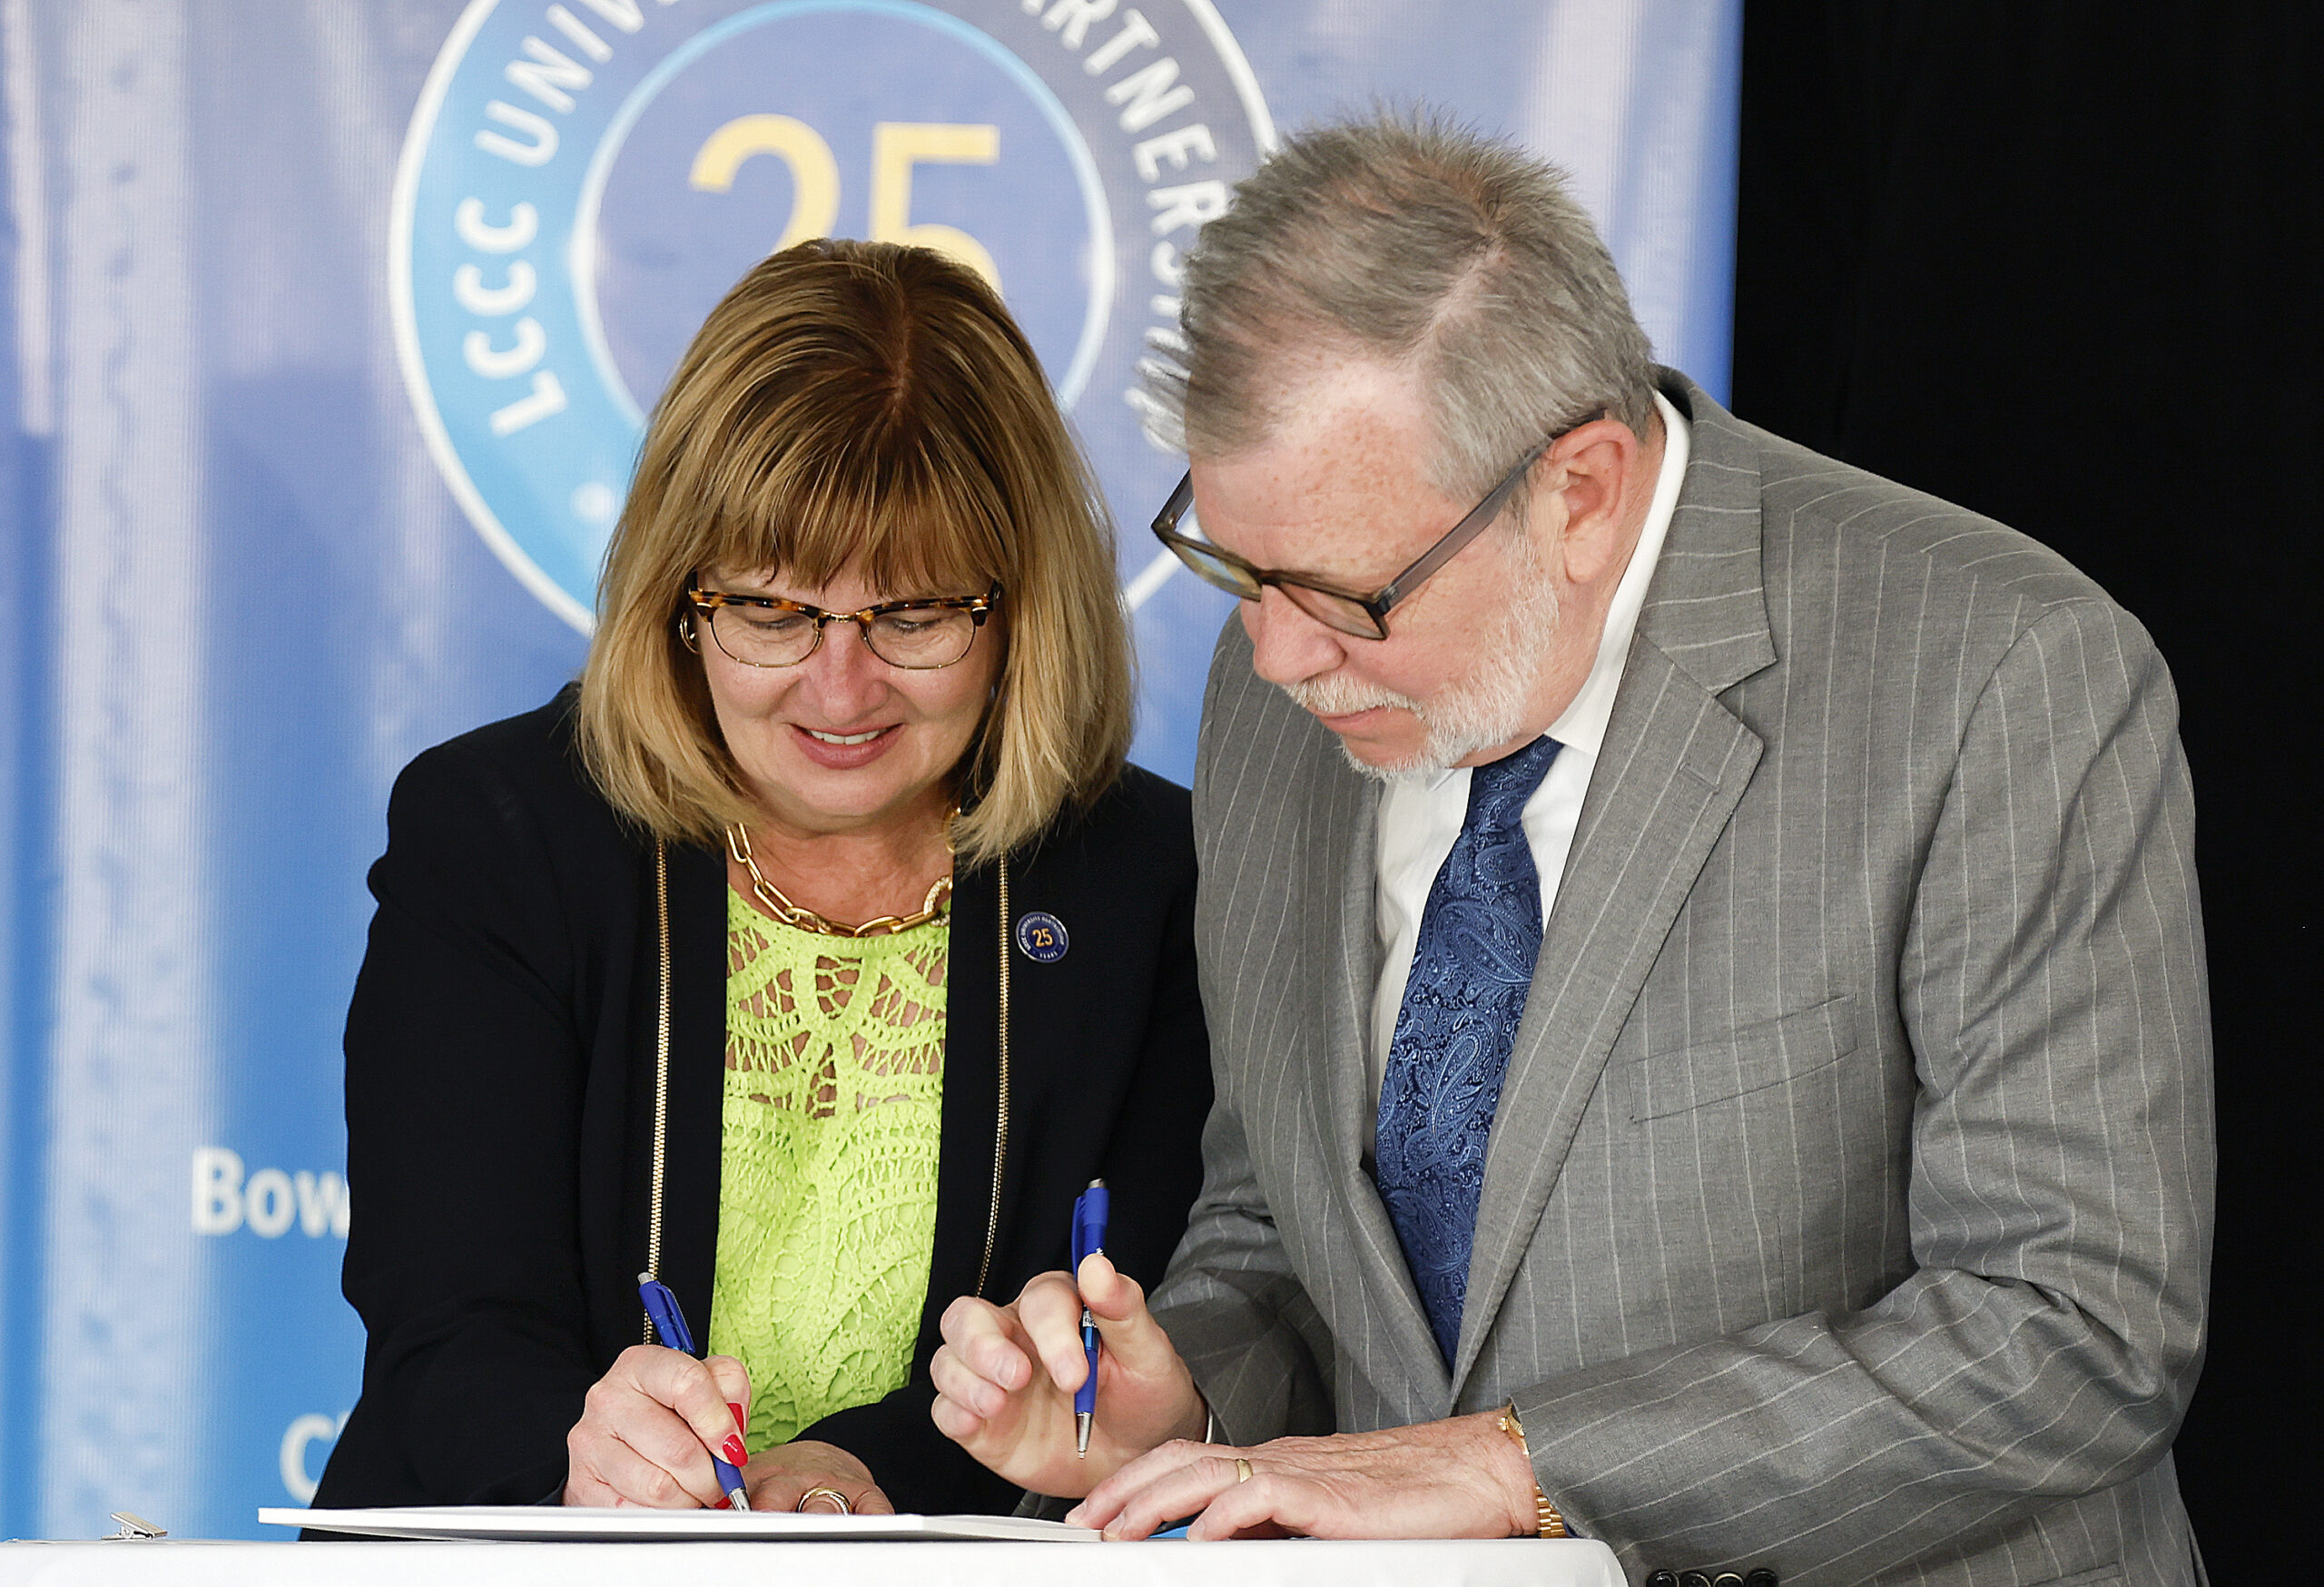 Photo of CWRU President Eric W. Kaler and Lorain County Community College President Marcia Ballinger sining a cooperative agreement.